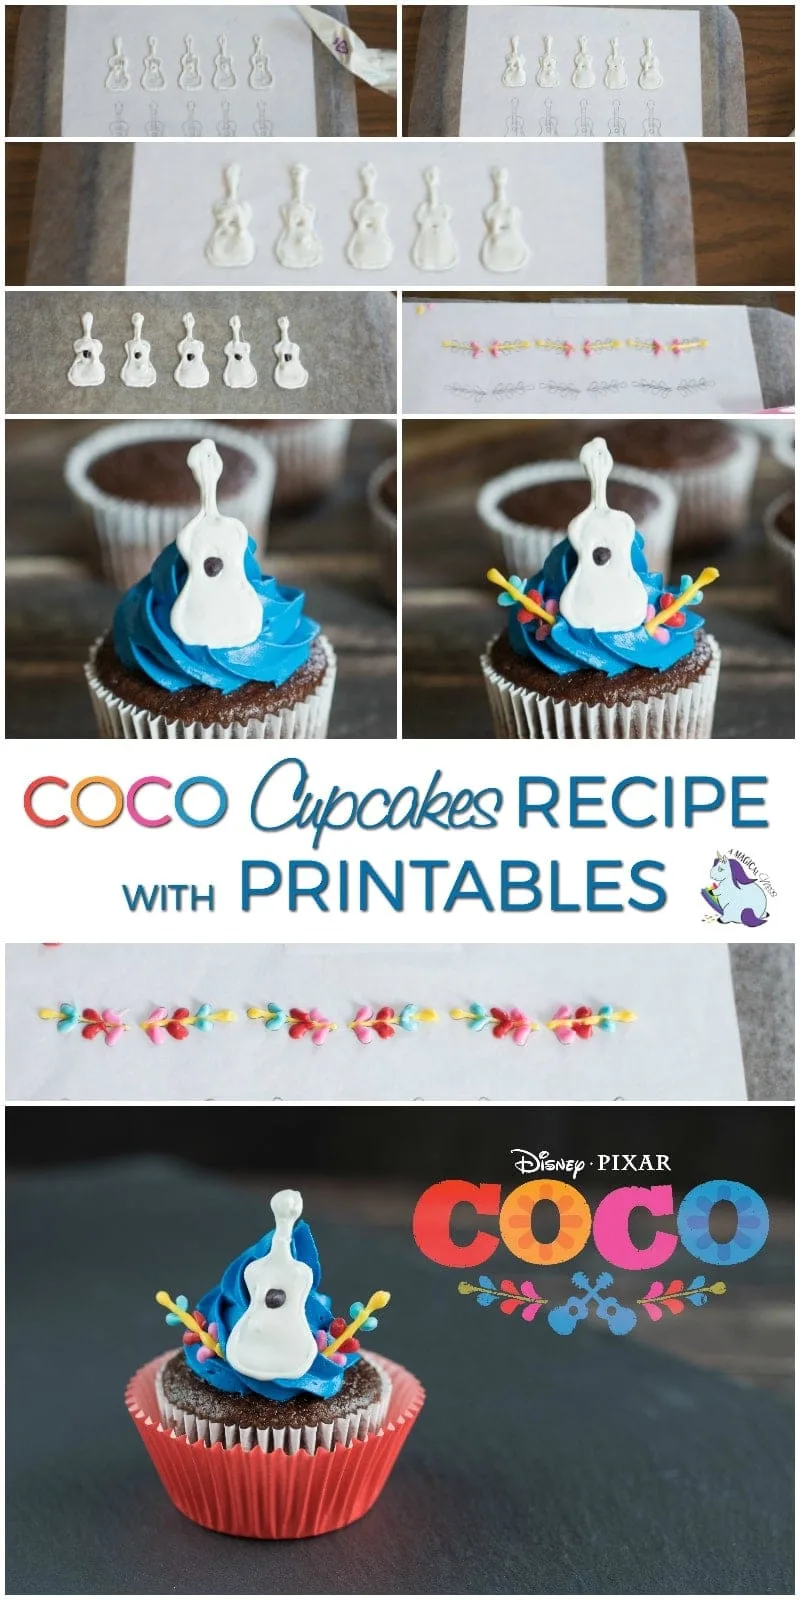 Cupcakes topped with a guitar and decorates inspired by the COCO movie. 